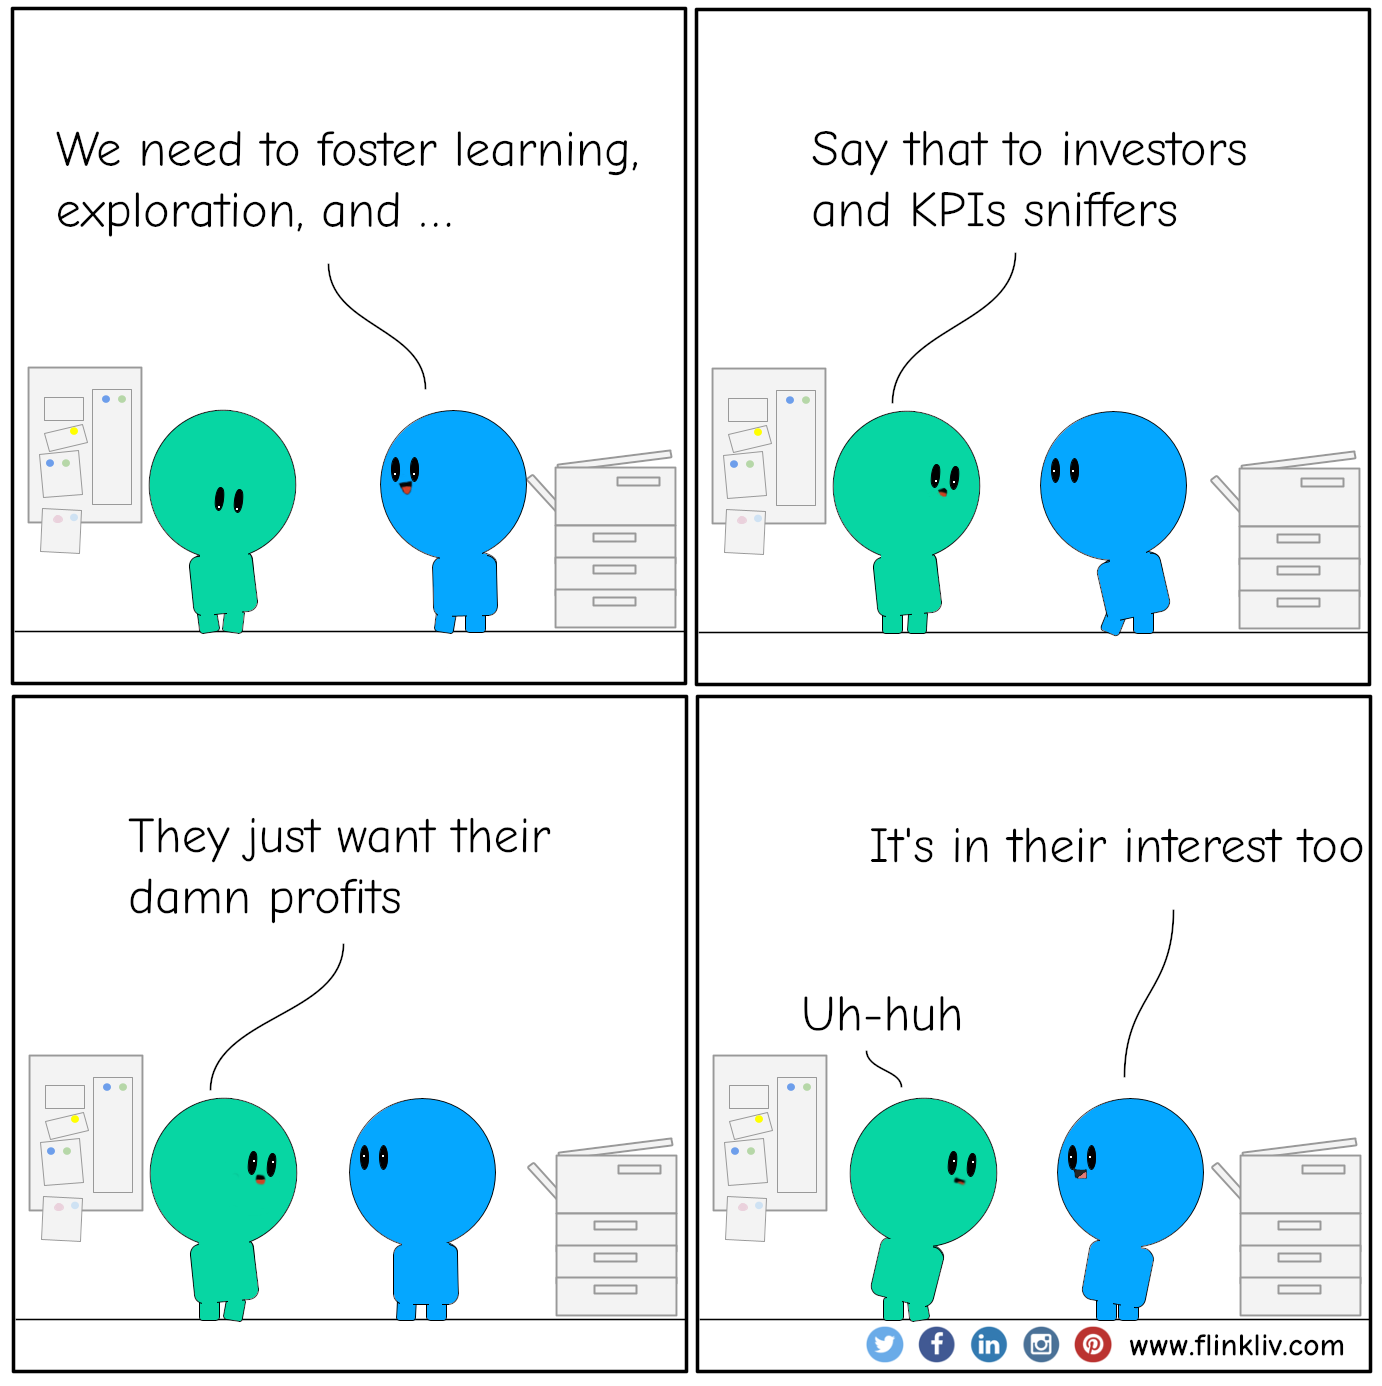 Conversation between A and B about how it is challenging fostering exploration, experimentation, and learning in a business context
				B: We need to foster exploration, experimentation, and learning.
				A: Sounds good doesn't work
				A: Say that to investors and KPIs sniffer.
				B: They just want their damn profits.
				A: But it is in their interst as well
              